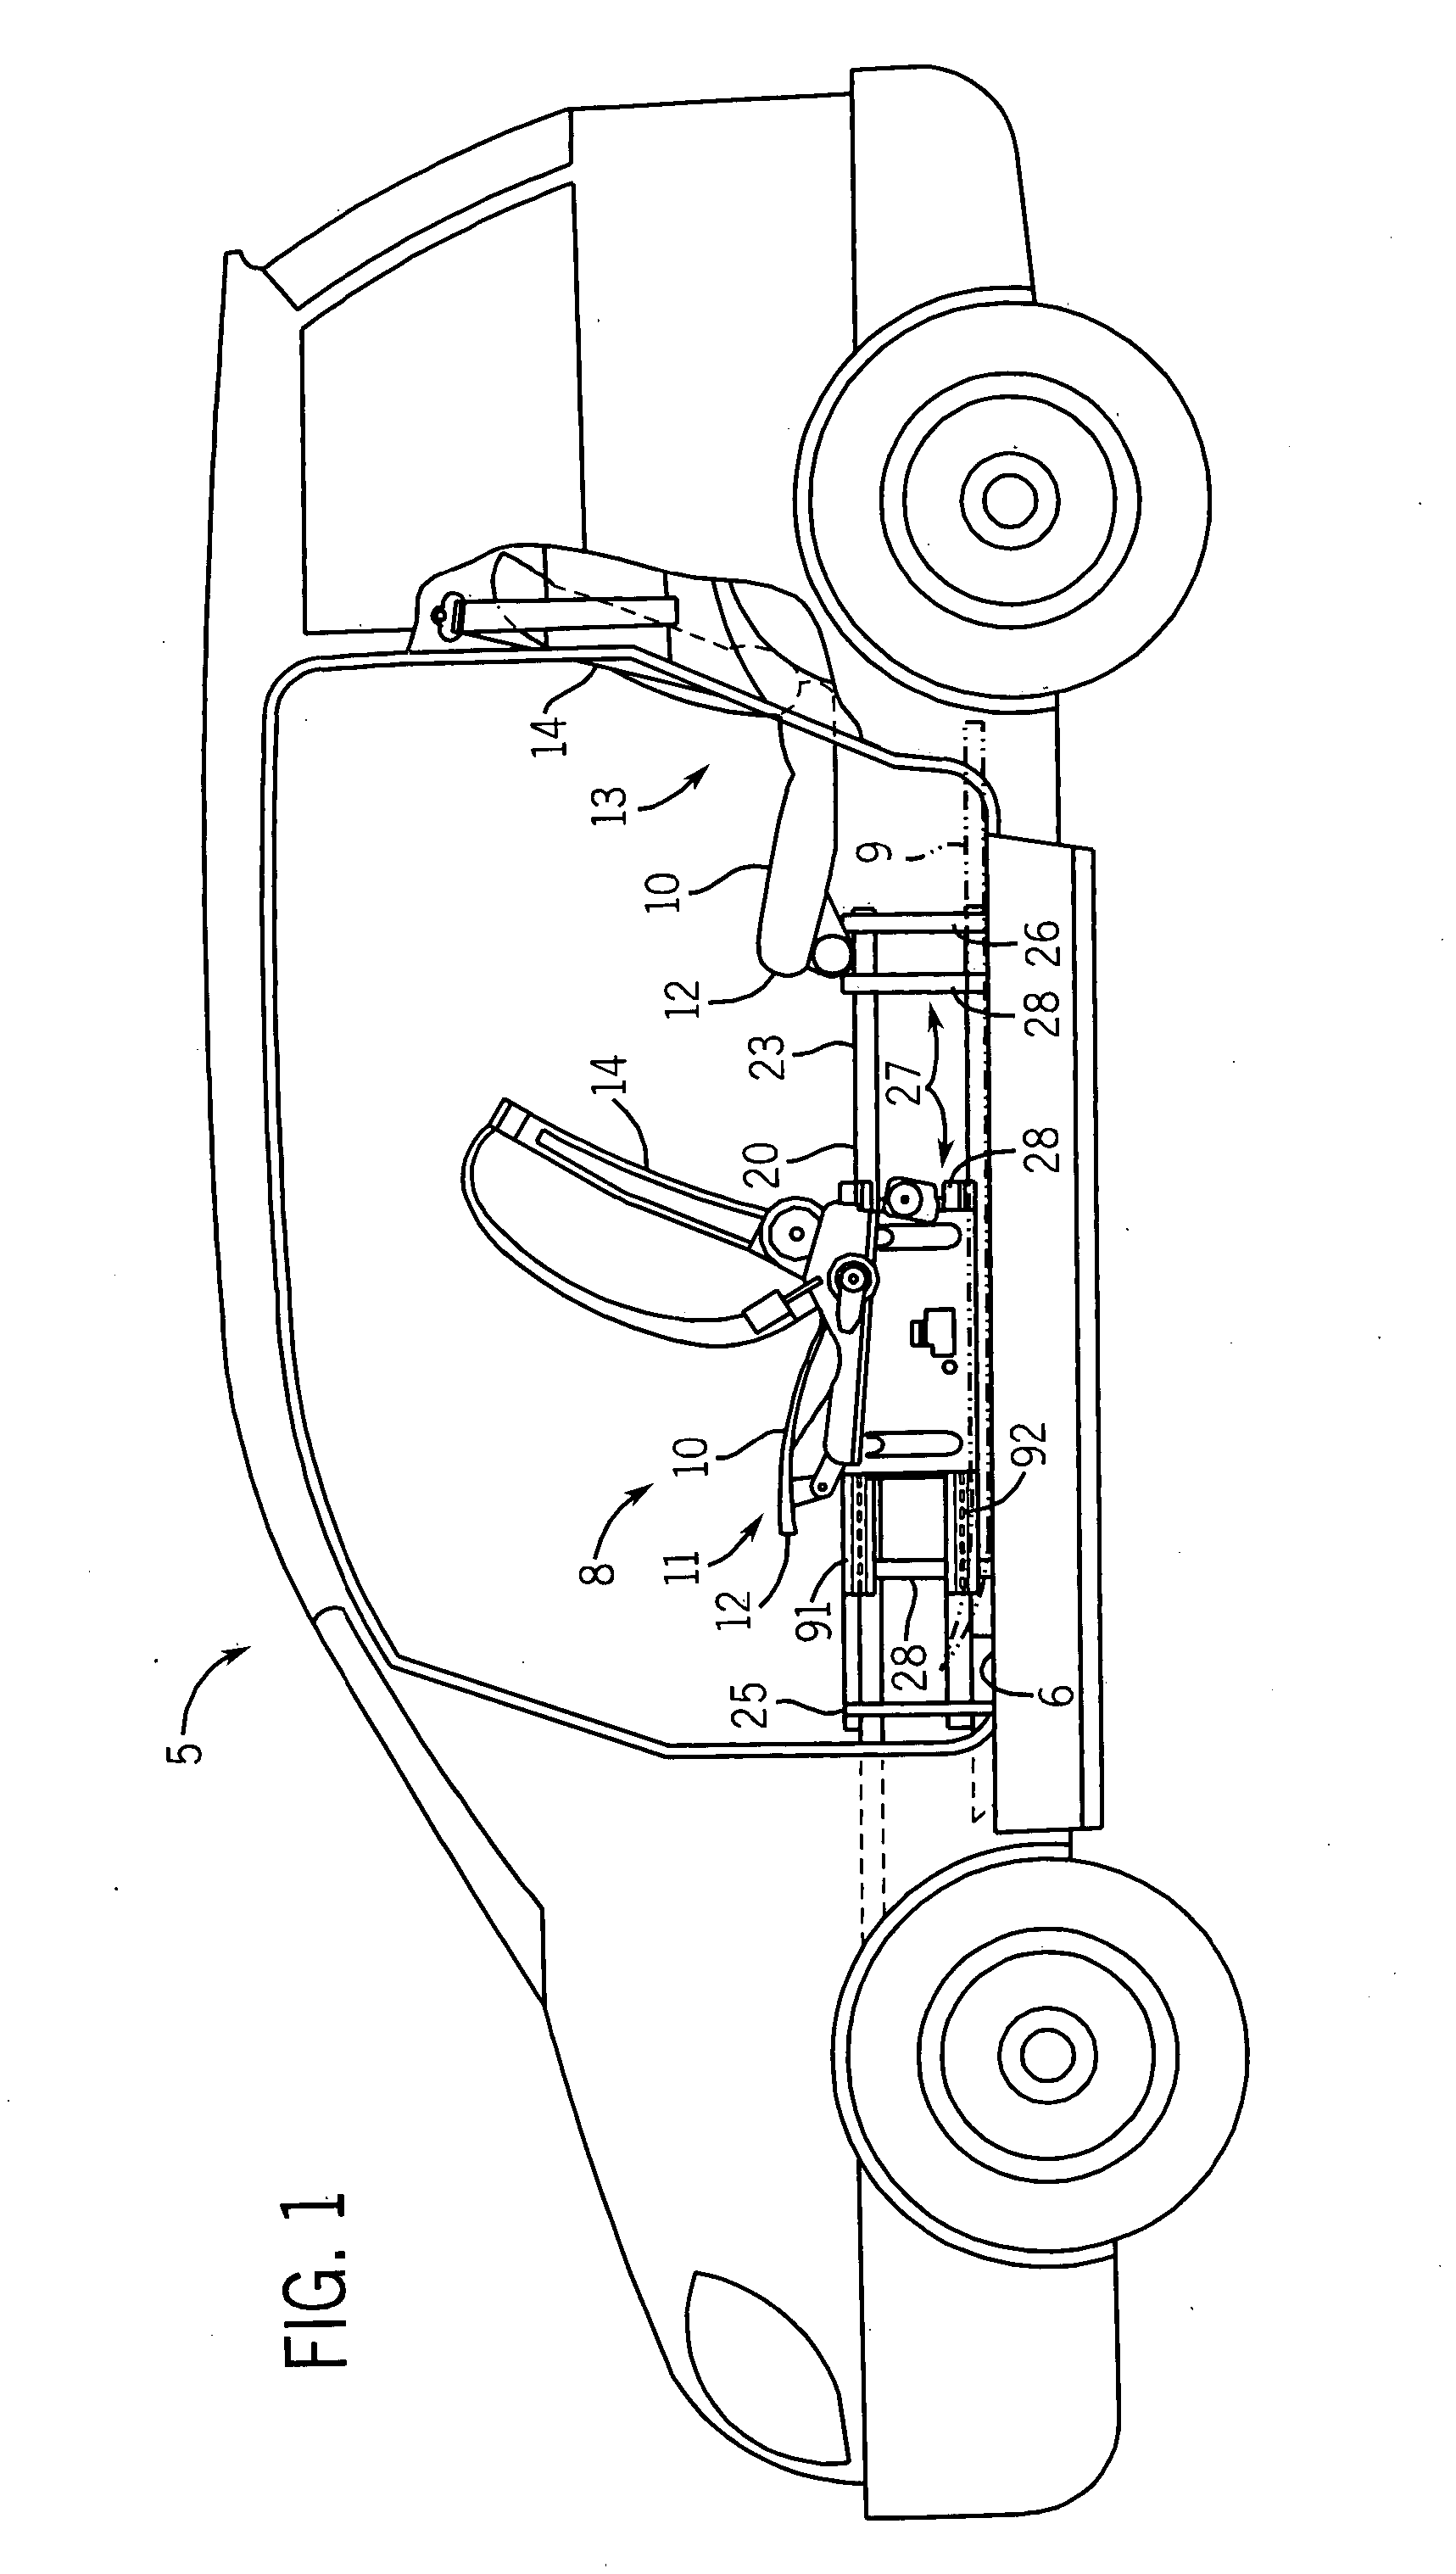 Cantilever supported vehicle seat and system